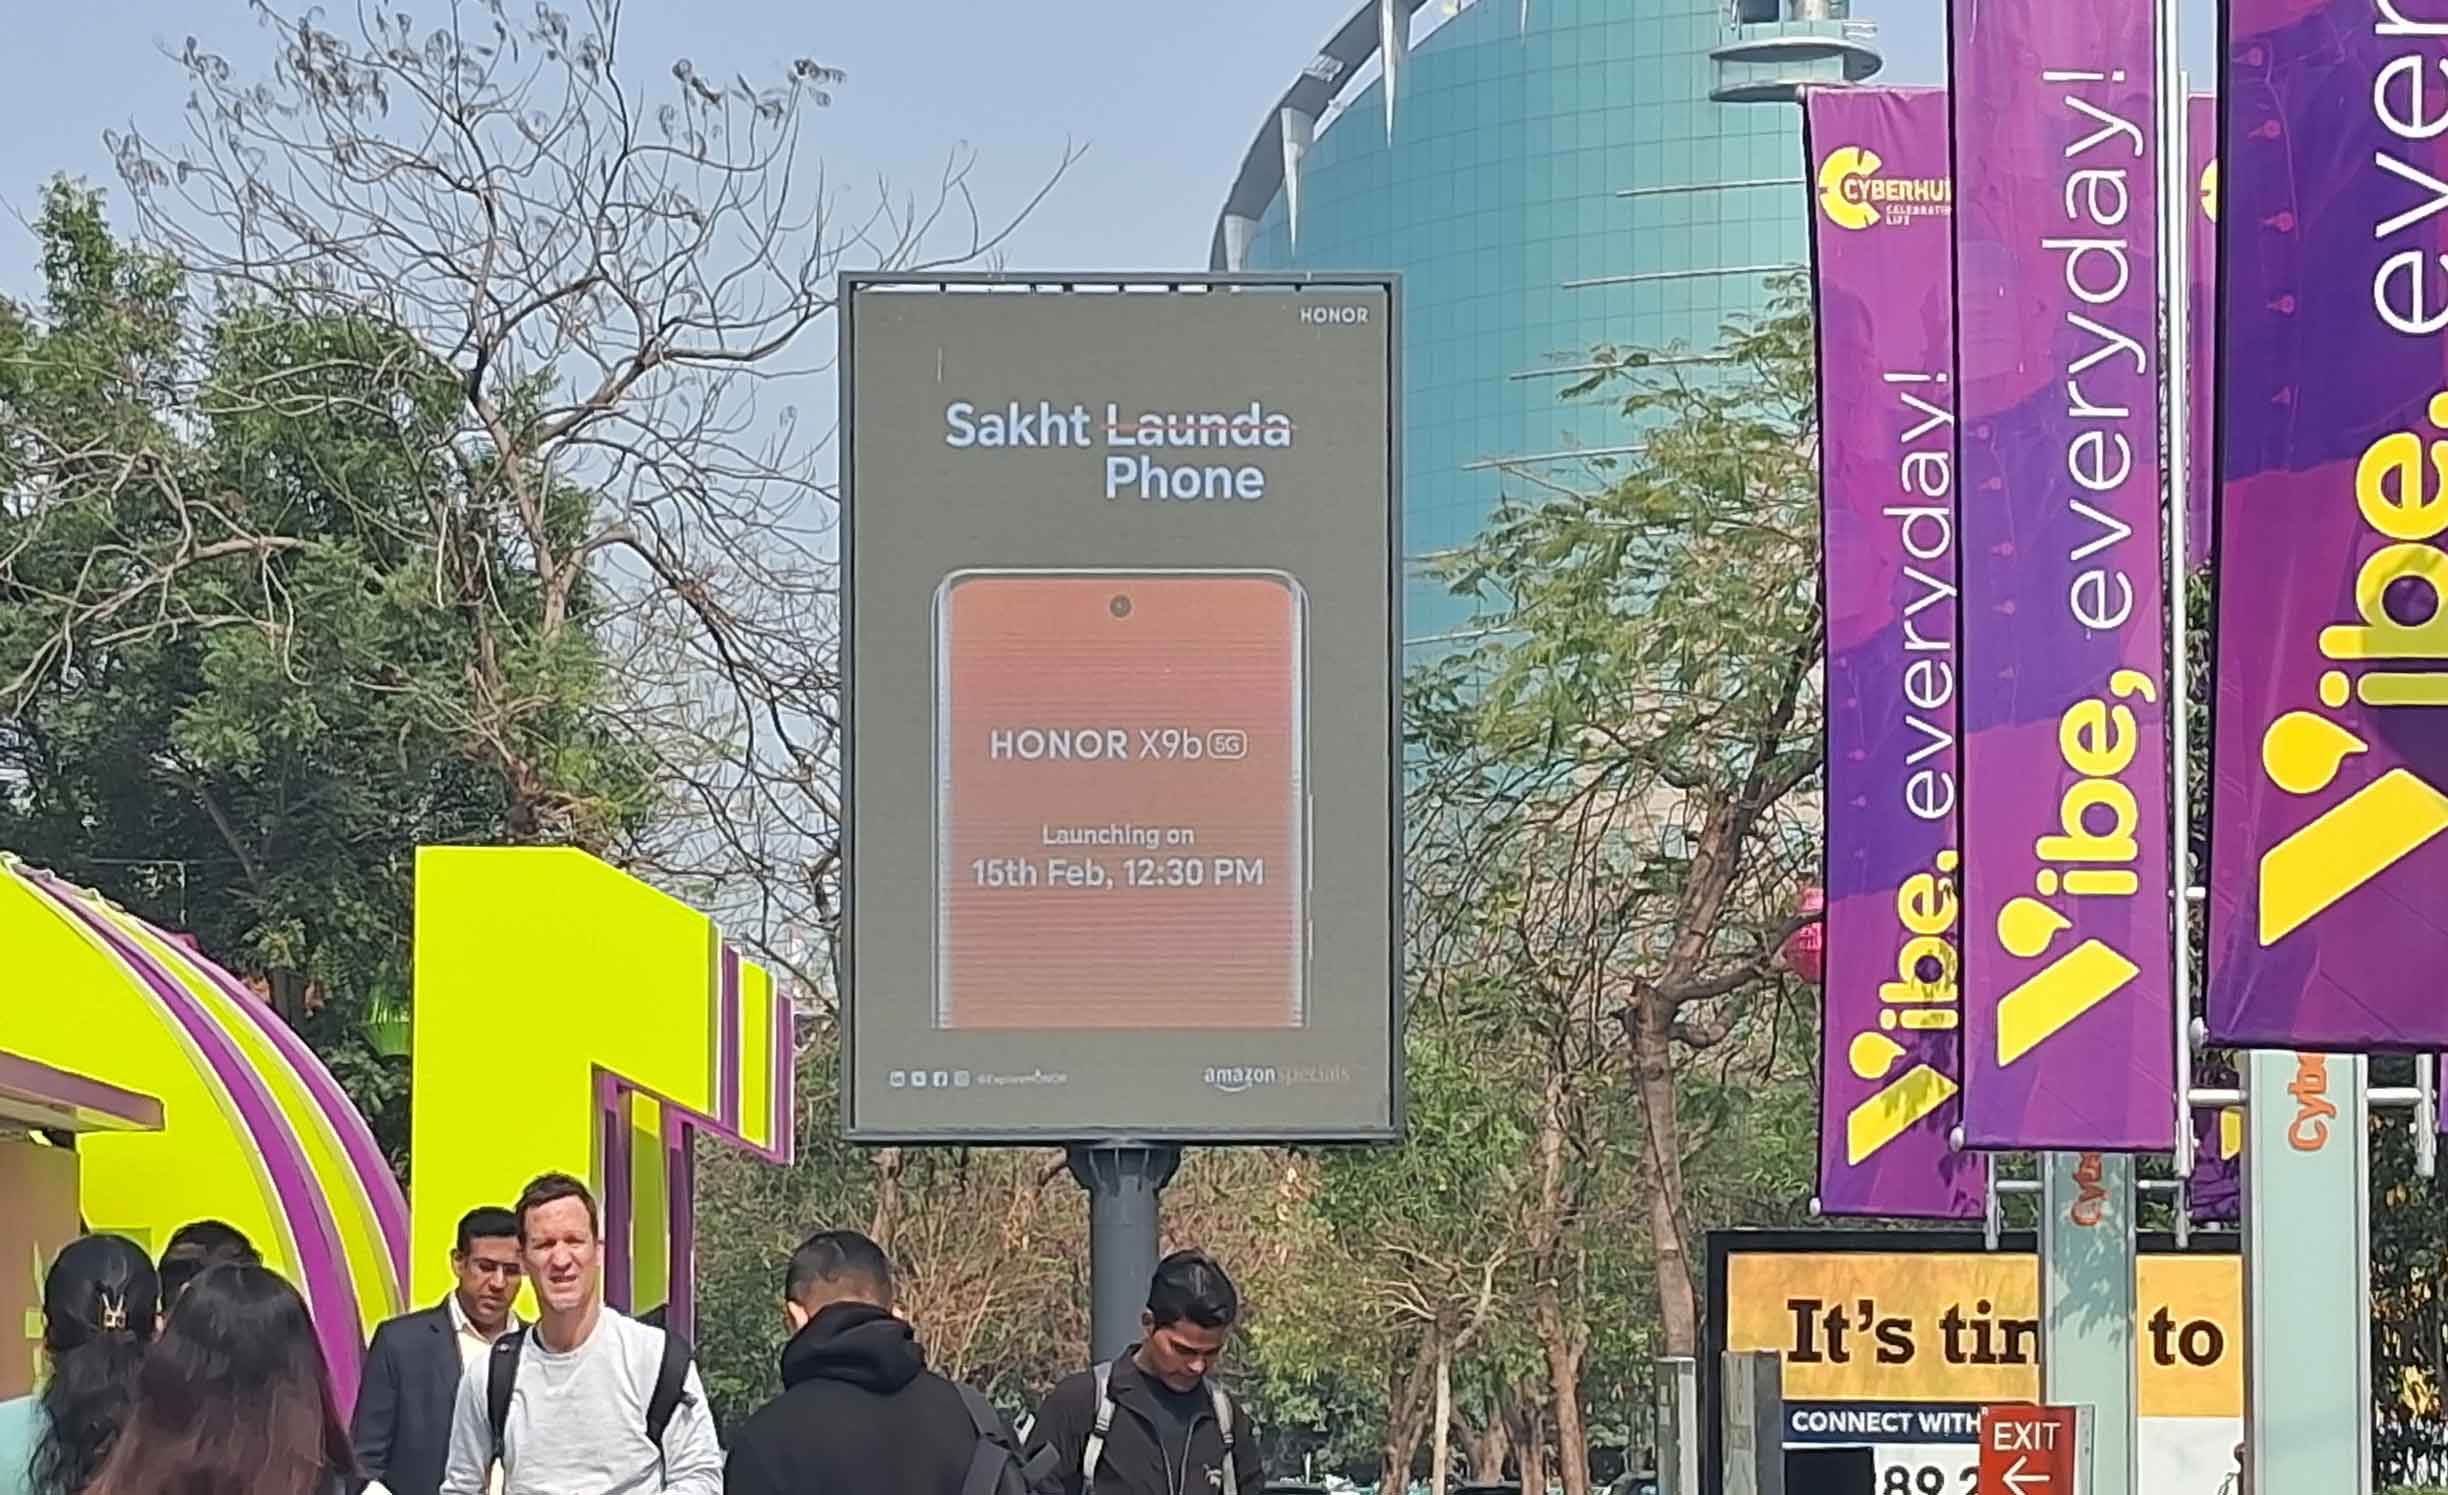 HONOR phone OOH campaign